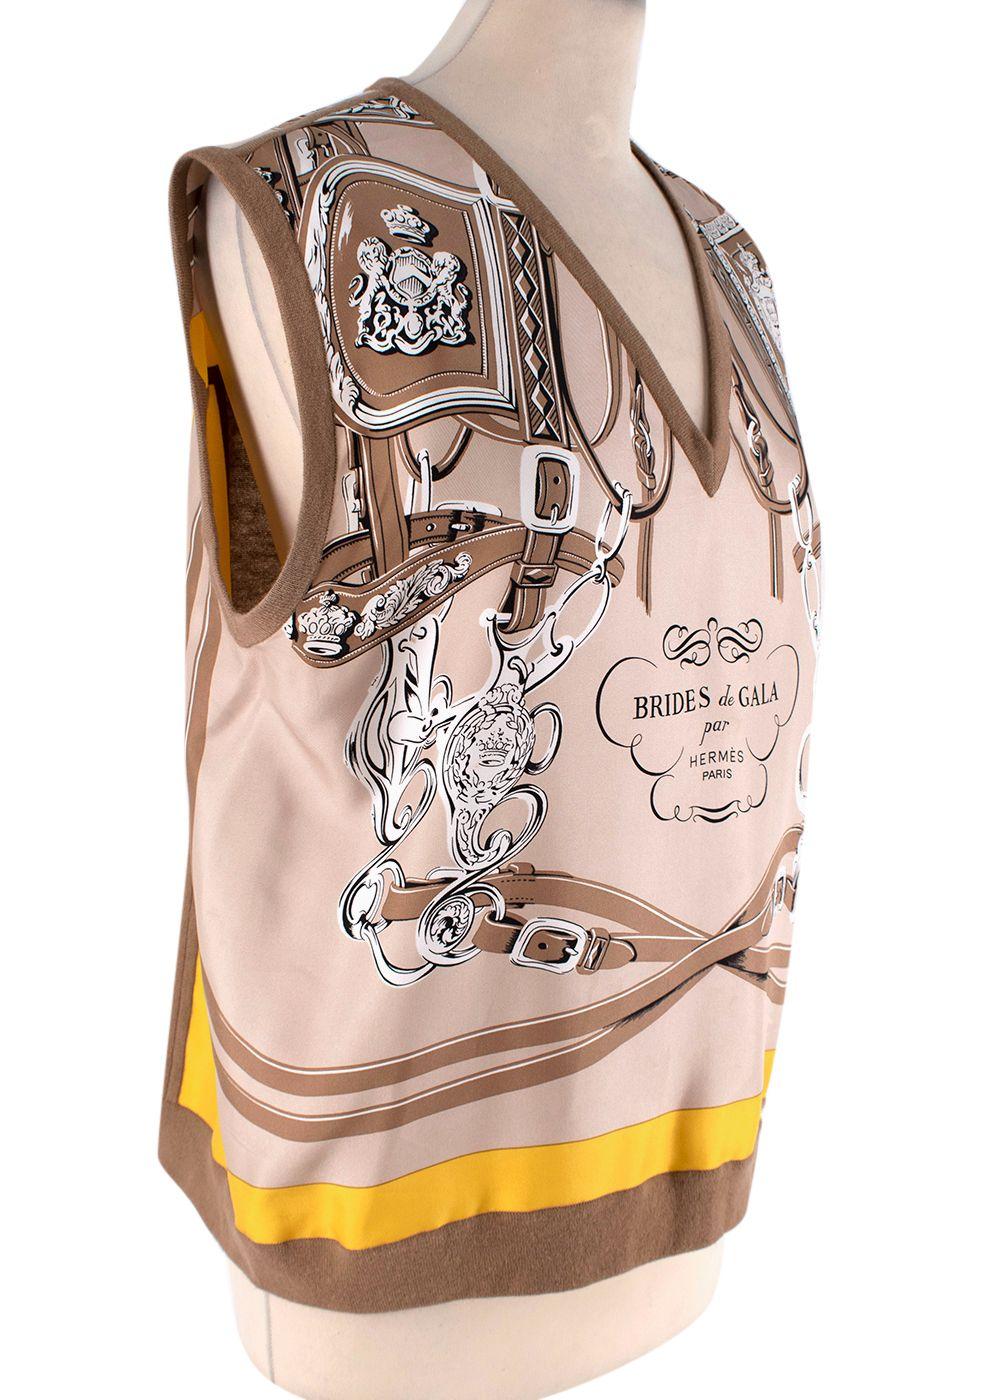 Hermes Brides De Gala Silk Knit Vest

- Brides De Gala silk scarf print in brown, beige and yellow hies
- Knit panel in back 
- V-neck 
- Ribbed collar, arm holes, and hemline

Item measured on flat surface, seam to seam. 

42cm Shoulder to shoulder